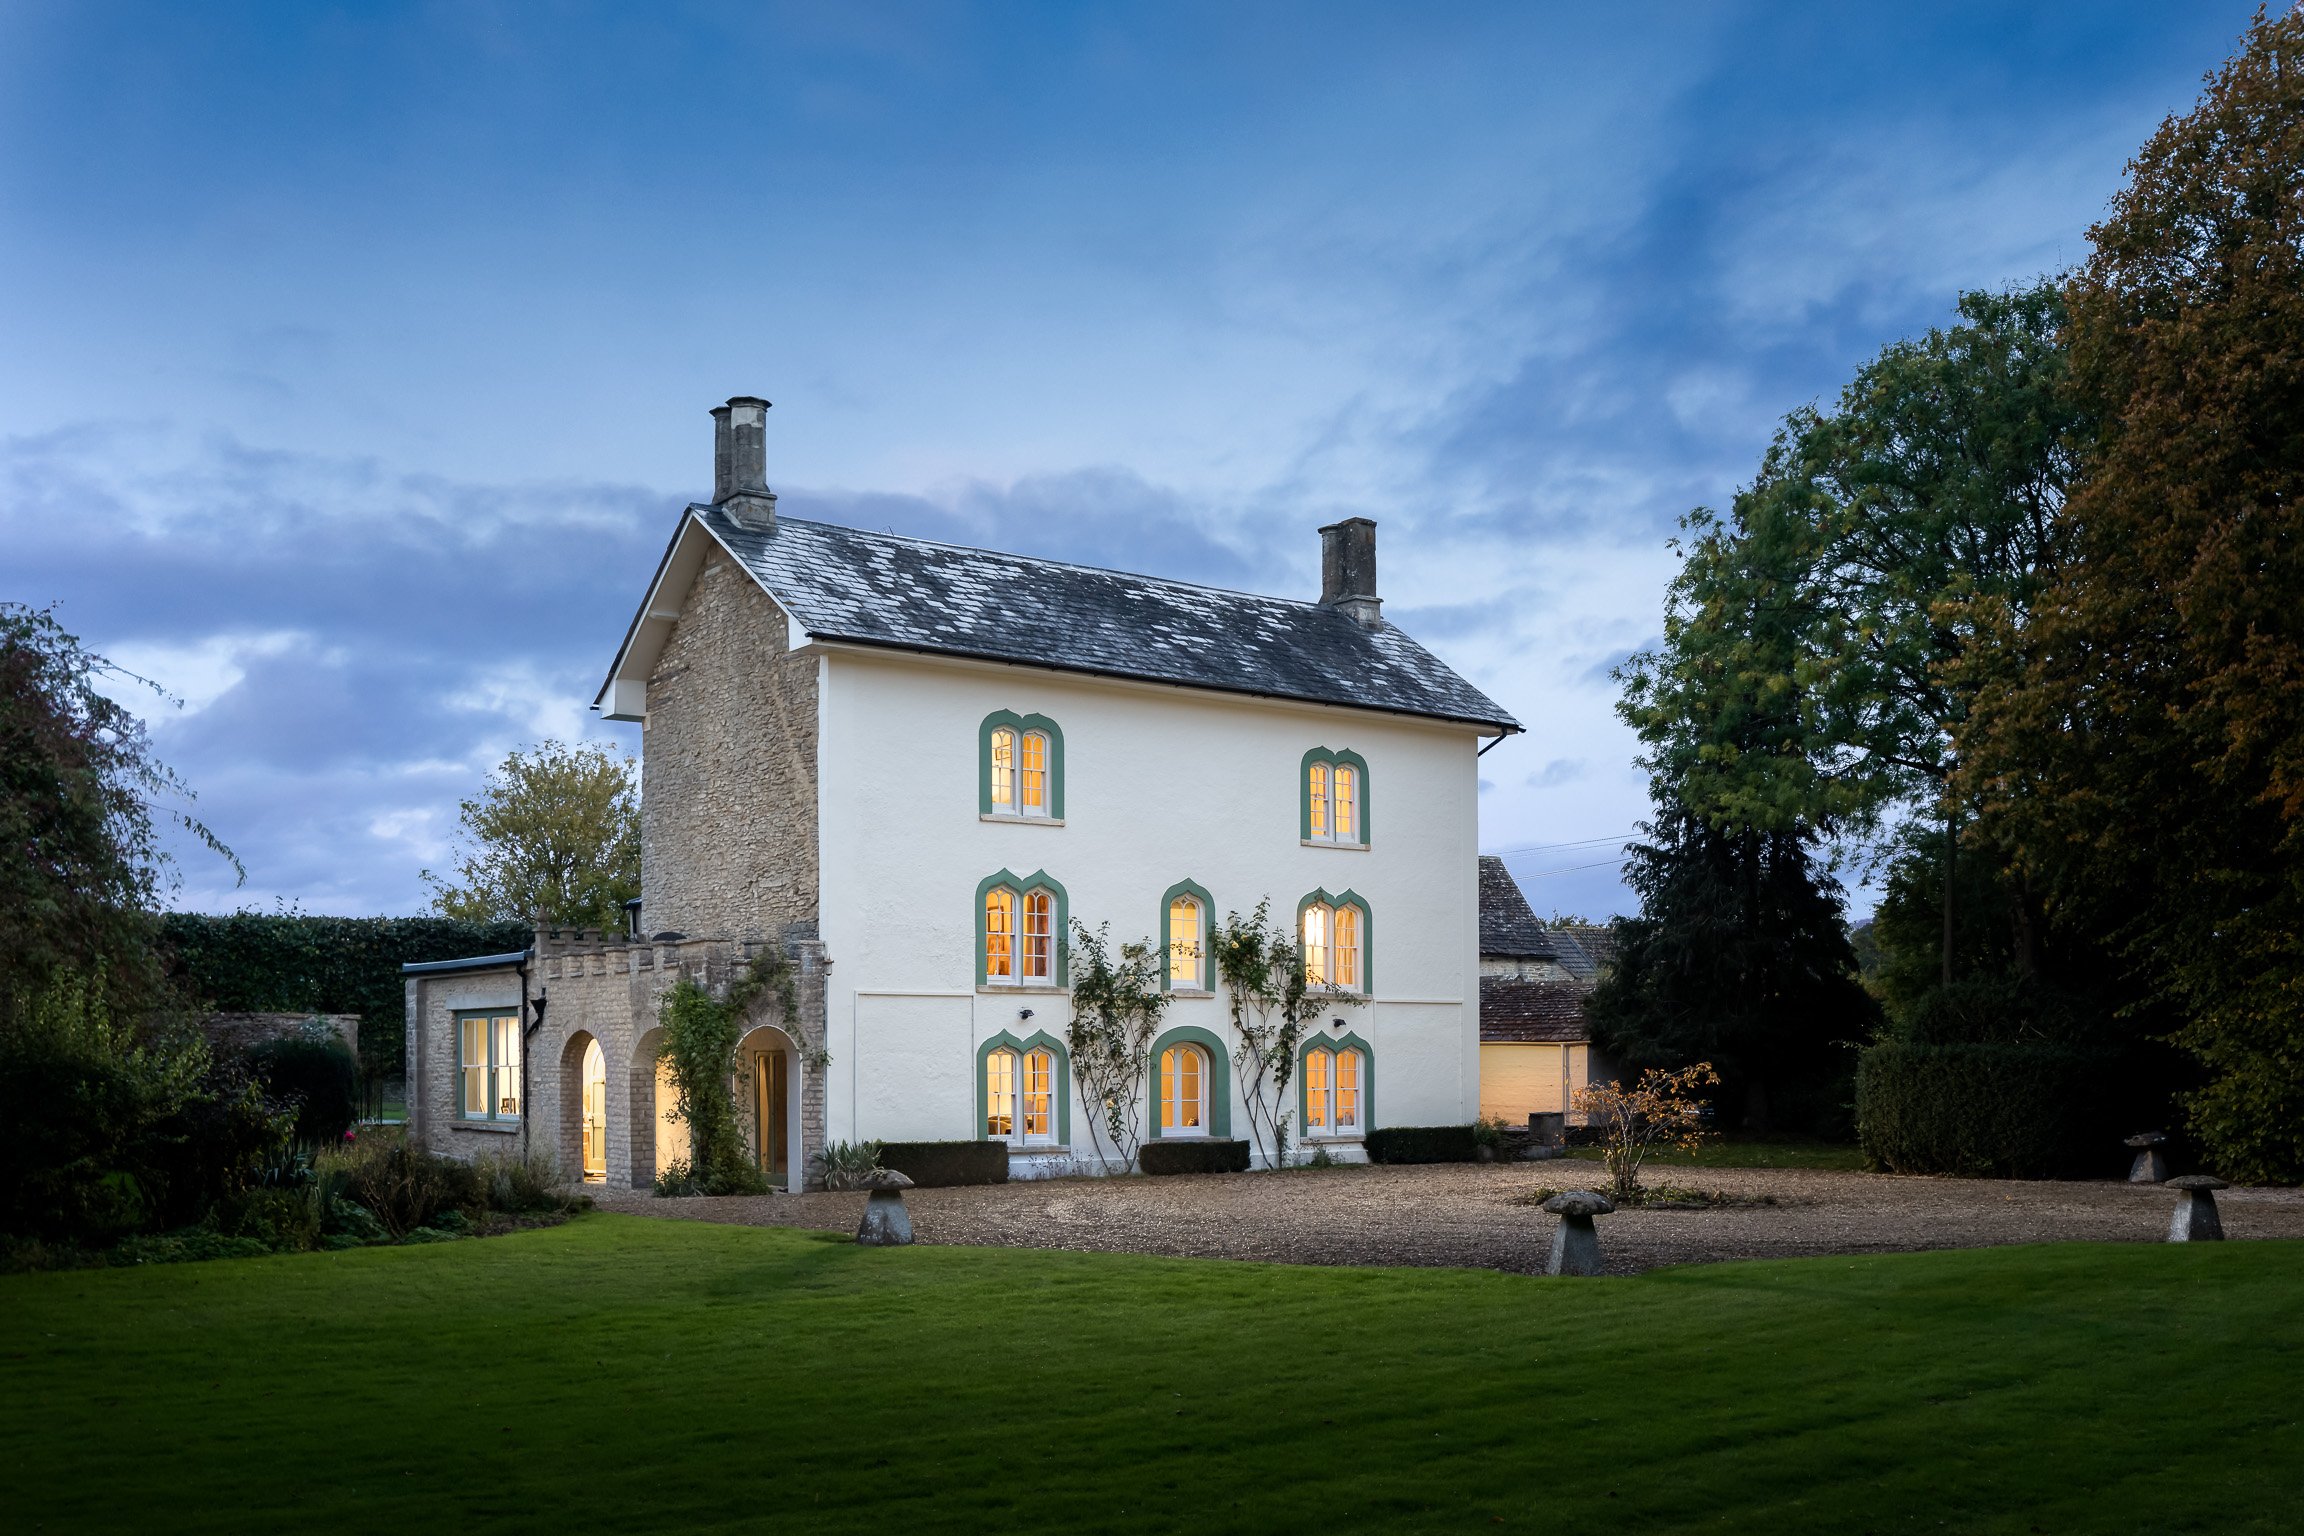 9 - Cotswold, Estate Agent, Gloucestershire, Photographer, Property, Real Estate.jpg